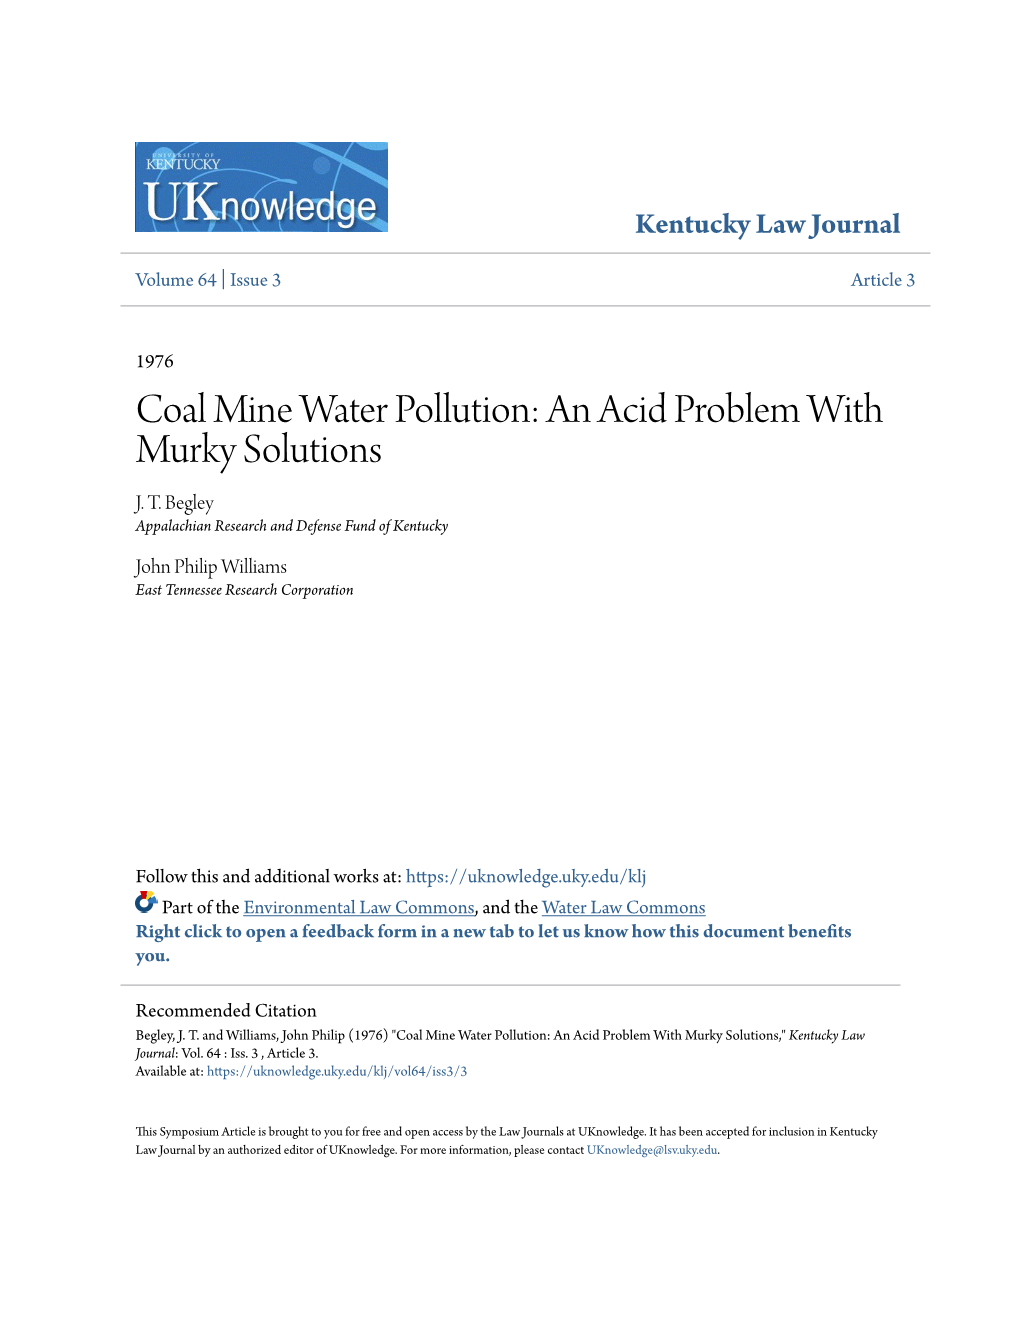 Coal Mine Water Pollution: an Acid Problem with Murky Solutions J